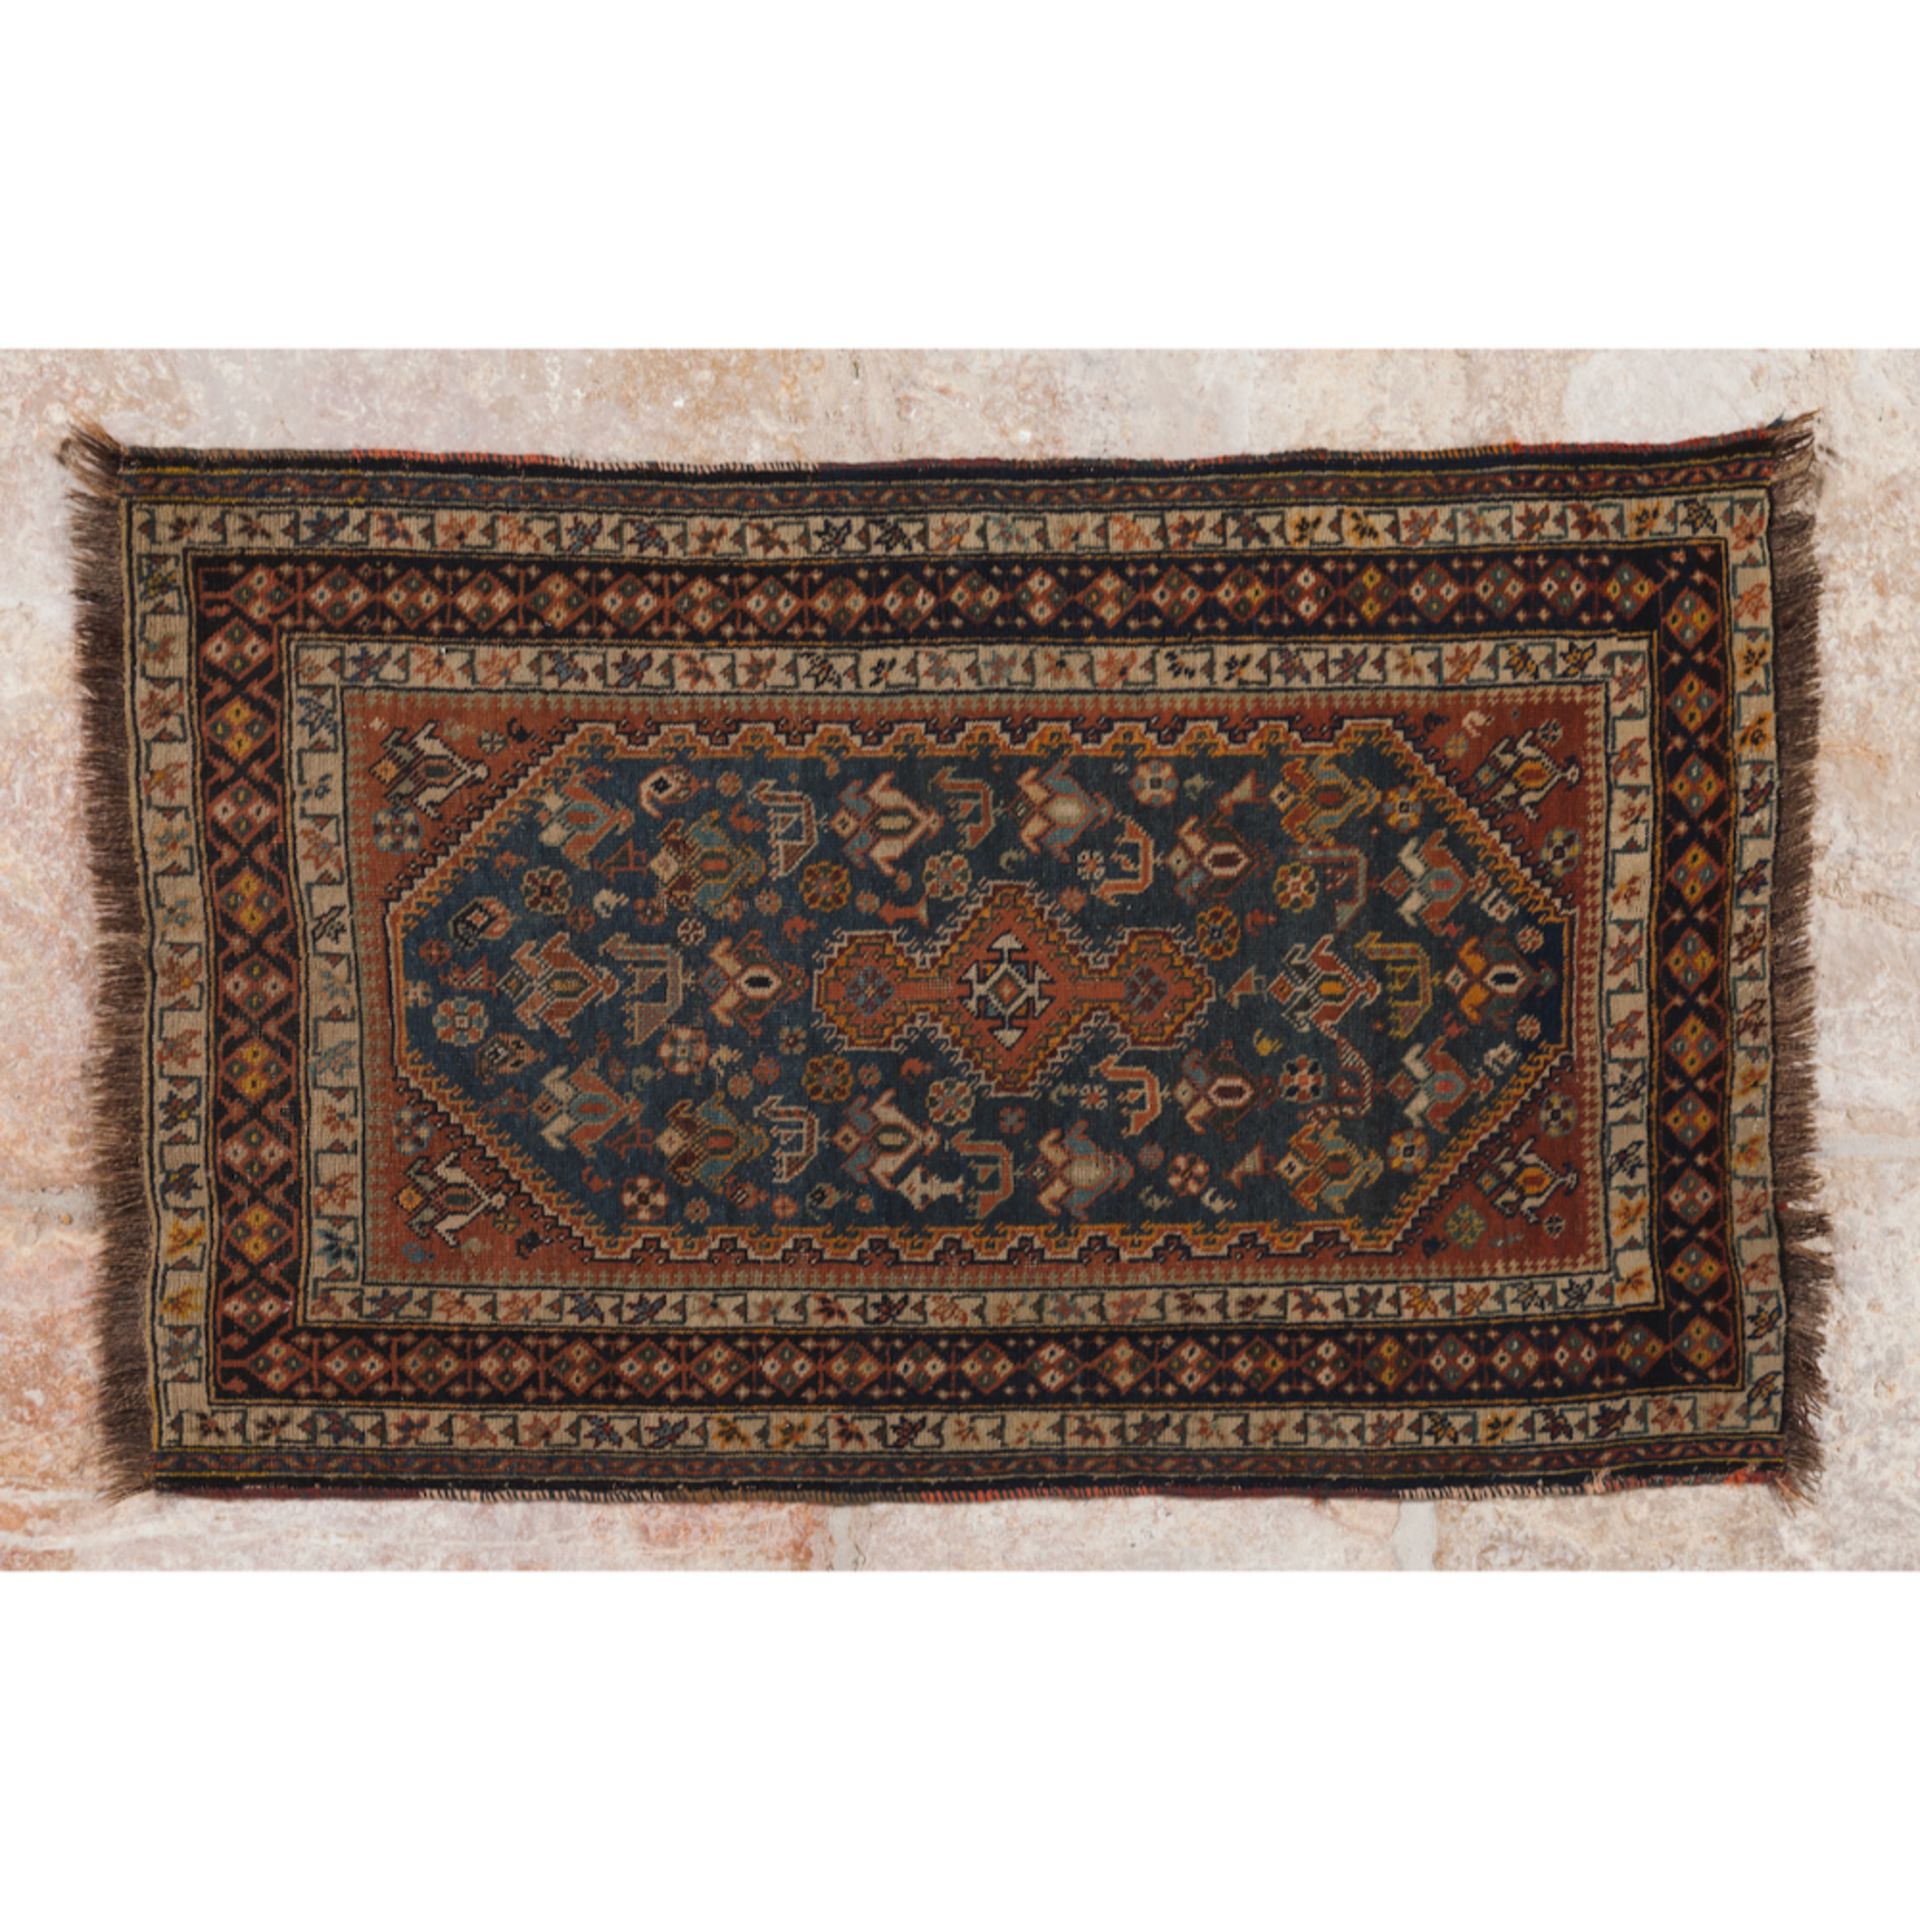 A kashal rug, IranIn wood and cotton Geometric design in shades of burgundy, green and blue (signs